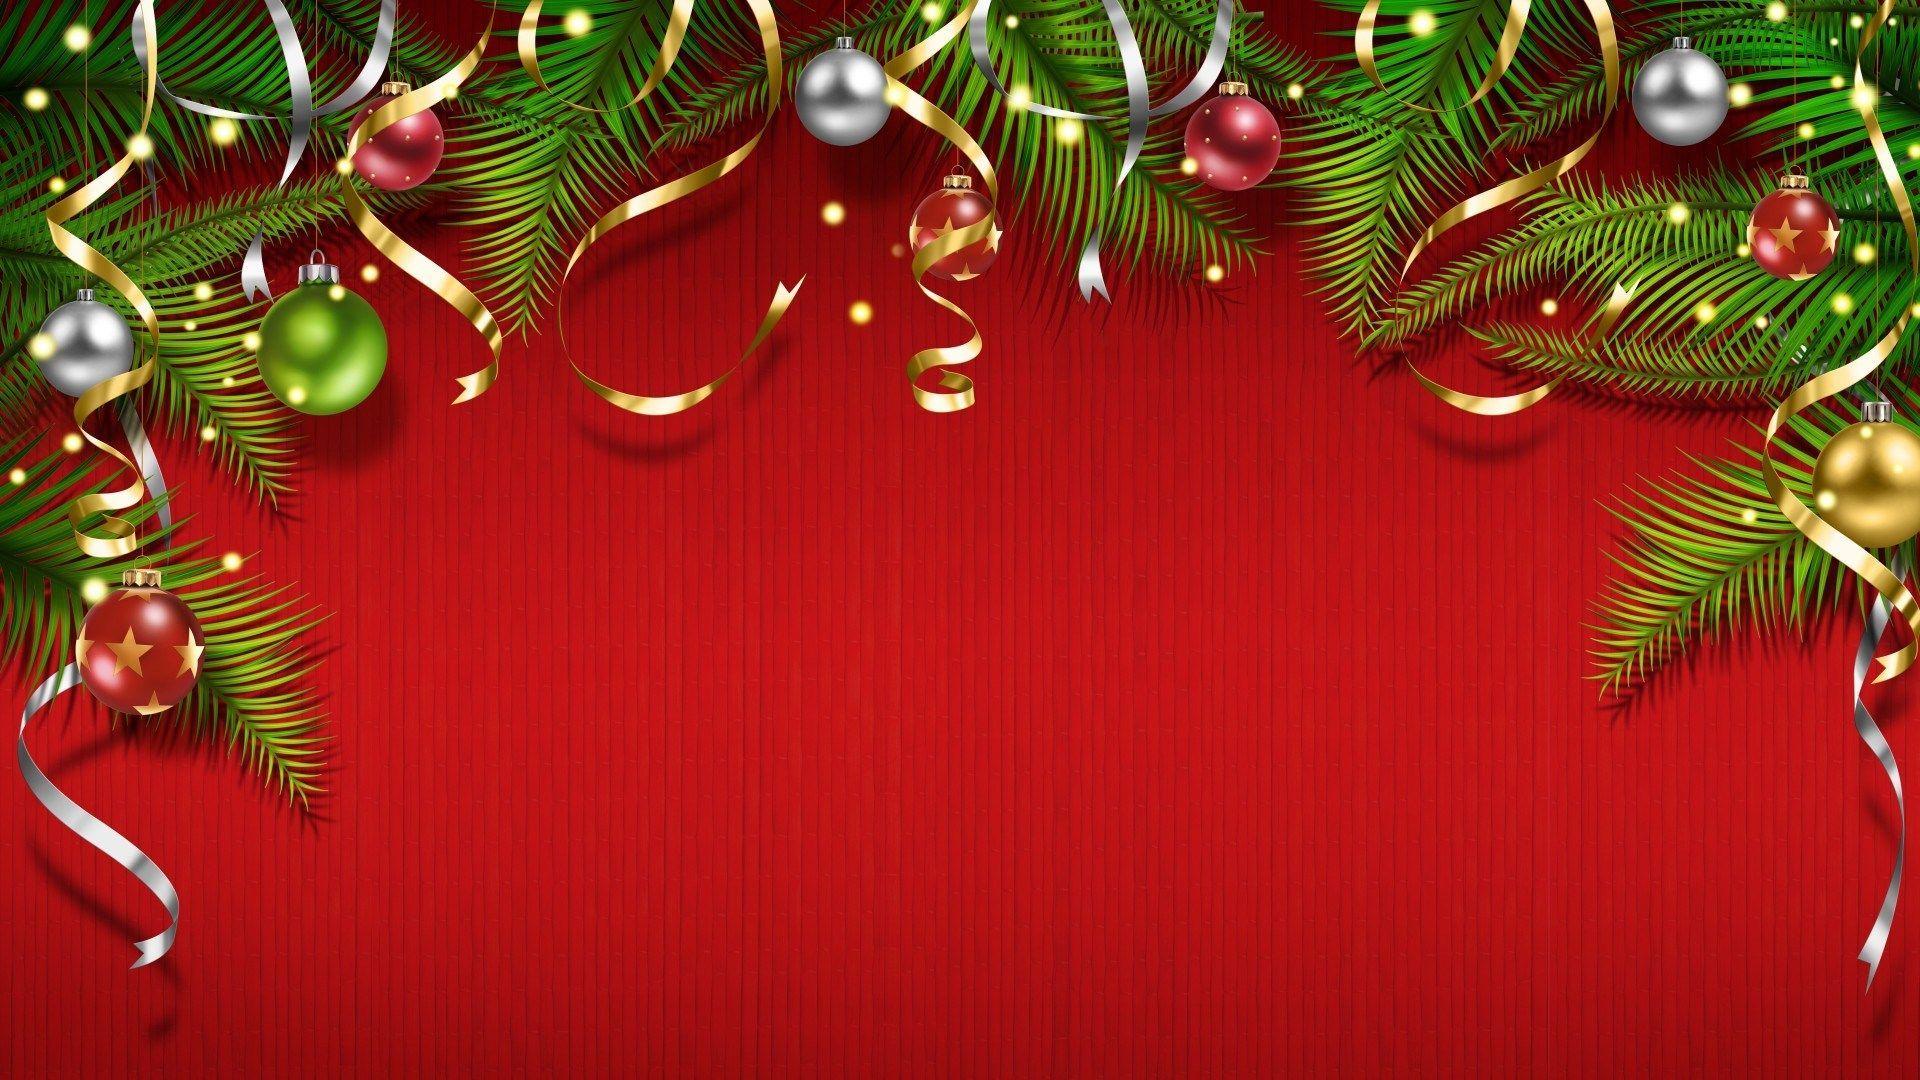 Free Christmas Decorations Bell Background Images Welcome To Christmas  Party Poster Photo Background PNG and Vectors  Christmas party poster  Party poster Welcome to christmas